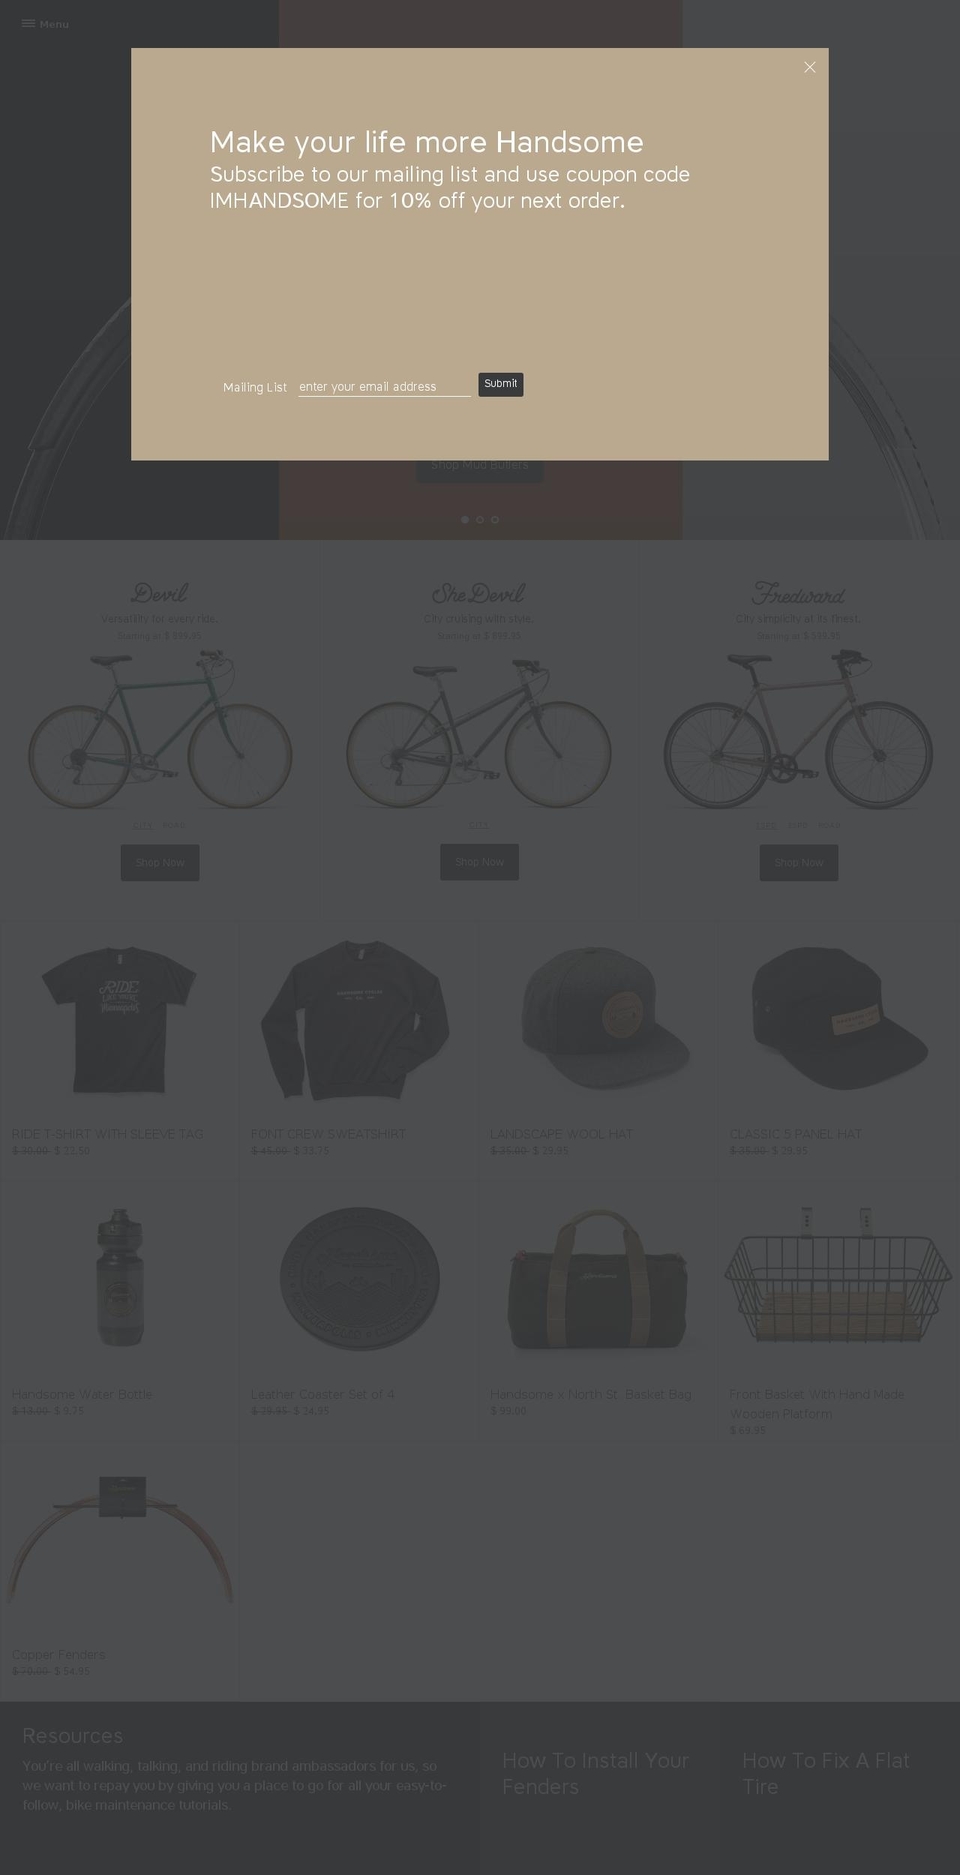 Clean Shopify theme site example handsomecycles.com